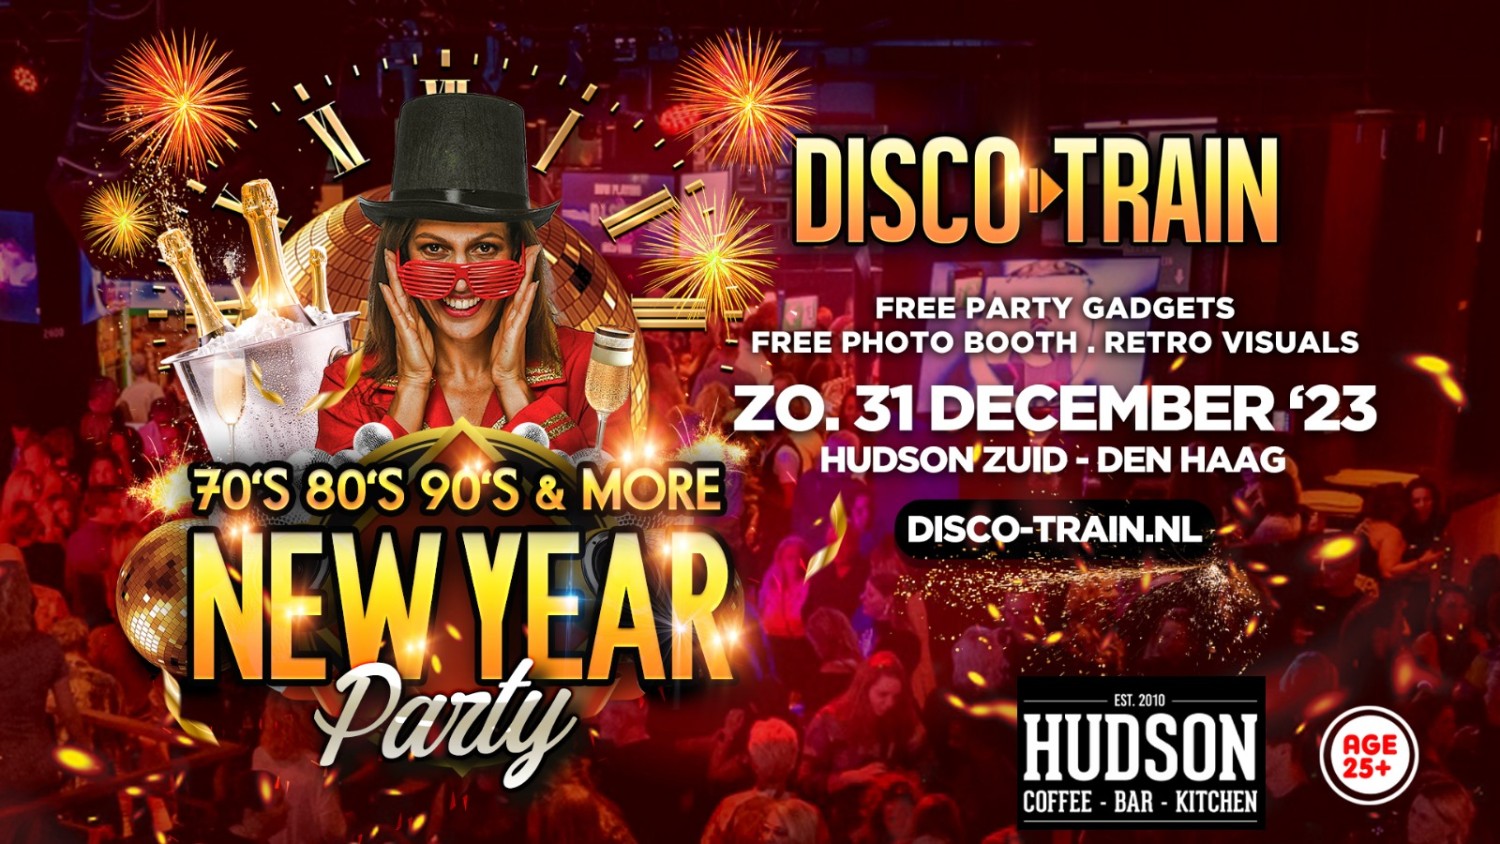 Party nieuws: Extra tickets Disco-Train New Year Party Den Haag